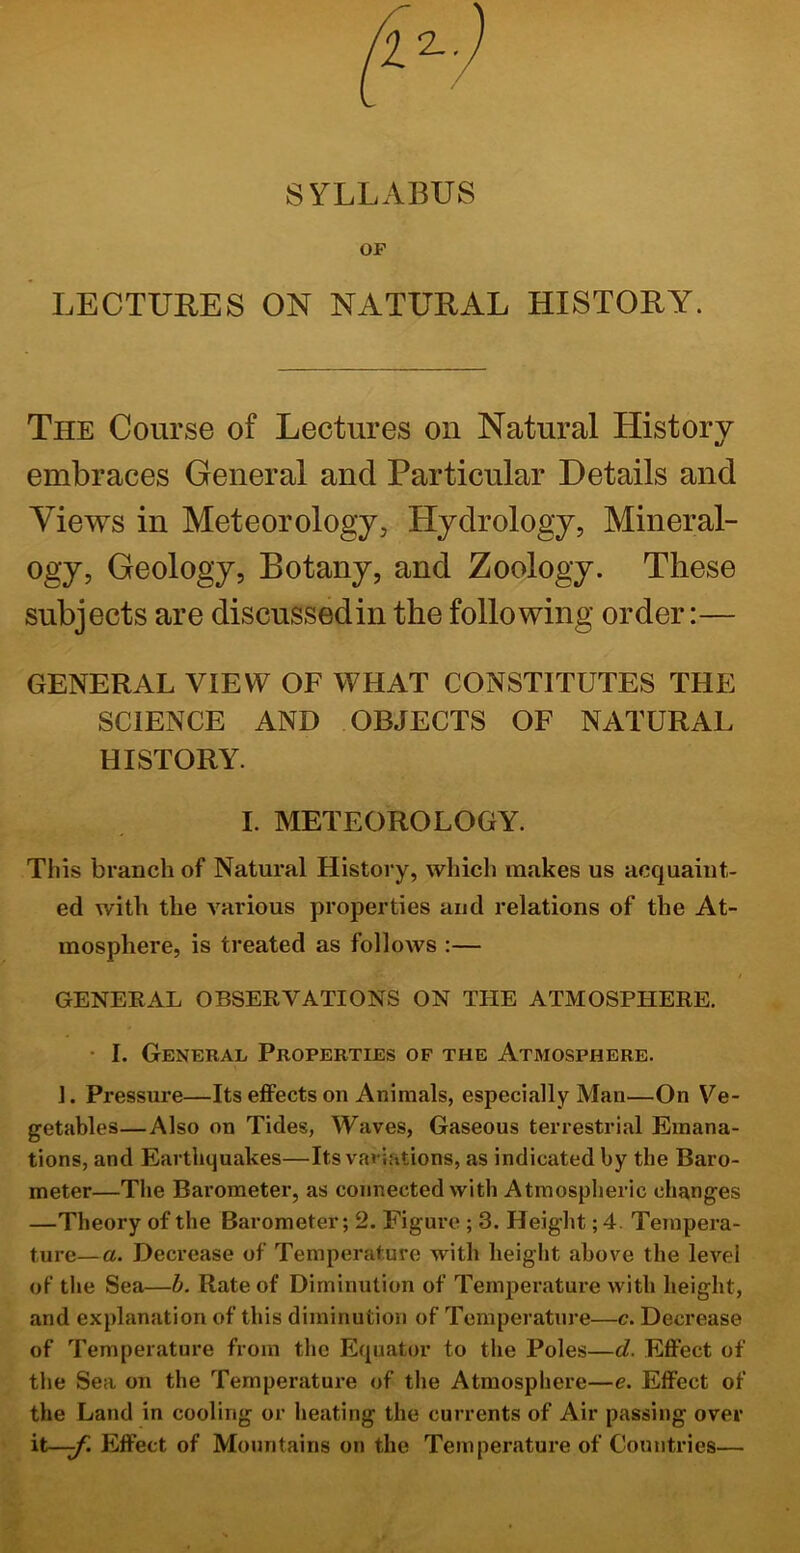 SYLLABUS OP LECTURES ON NATURAL HISTORY. The Course of Lectures on Natural History t/ embraces General and Particular Details and Views in Meteorology, Hydrology, Mineral- ogy, Geology, Botany, and Zoology. These subjects are discussed in the following order:— GENERAL VIEW OF WHAT CONSTITUTES THE SCIENCE AND OBJECTS OF NATURAL HISTORY. I. METEOROLOGY. This branch of Natural History, which makes us acquaint- ed with the various properties and relations of the At- mosphere, is treated as follows :— GENERAL OBSERVATIONS ON THE ATMOSPHERE. • I. General Properties of the Atmosphere. 1. Pressure—Its effects on Animals, especially Man—On Ve- getables—Also on Tides, Waves, Gaseous terrestrial Emana- tions, and Earthquakes—Its variations, as indicated by the Baro- meter—The Barometer, as connected with Atmospheric changes —Theory of the Barometer; 2. Figure ; 3. Height; 4. Tempera- ture— a. Decrease of Temperature with height above the level of tlie Sea—h. Rate of Diminution of Temperatui-e with height, and explanation of this diminution of Temperature—c. Decrease of Temperature from the Equator to the Poles—d. Effect of the Sea on the Temperature of the Atmosphere—e. Effect of the Land in cooling or heating the currents of Air passing over it—y: Effect of Mountains on the Temperature of Countries—